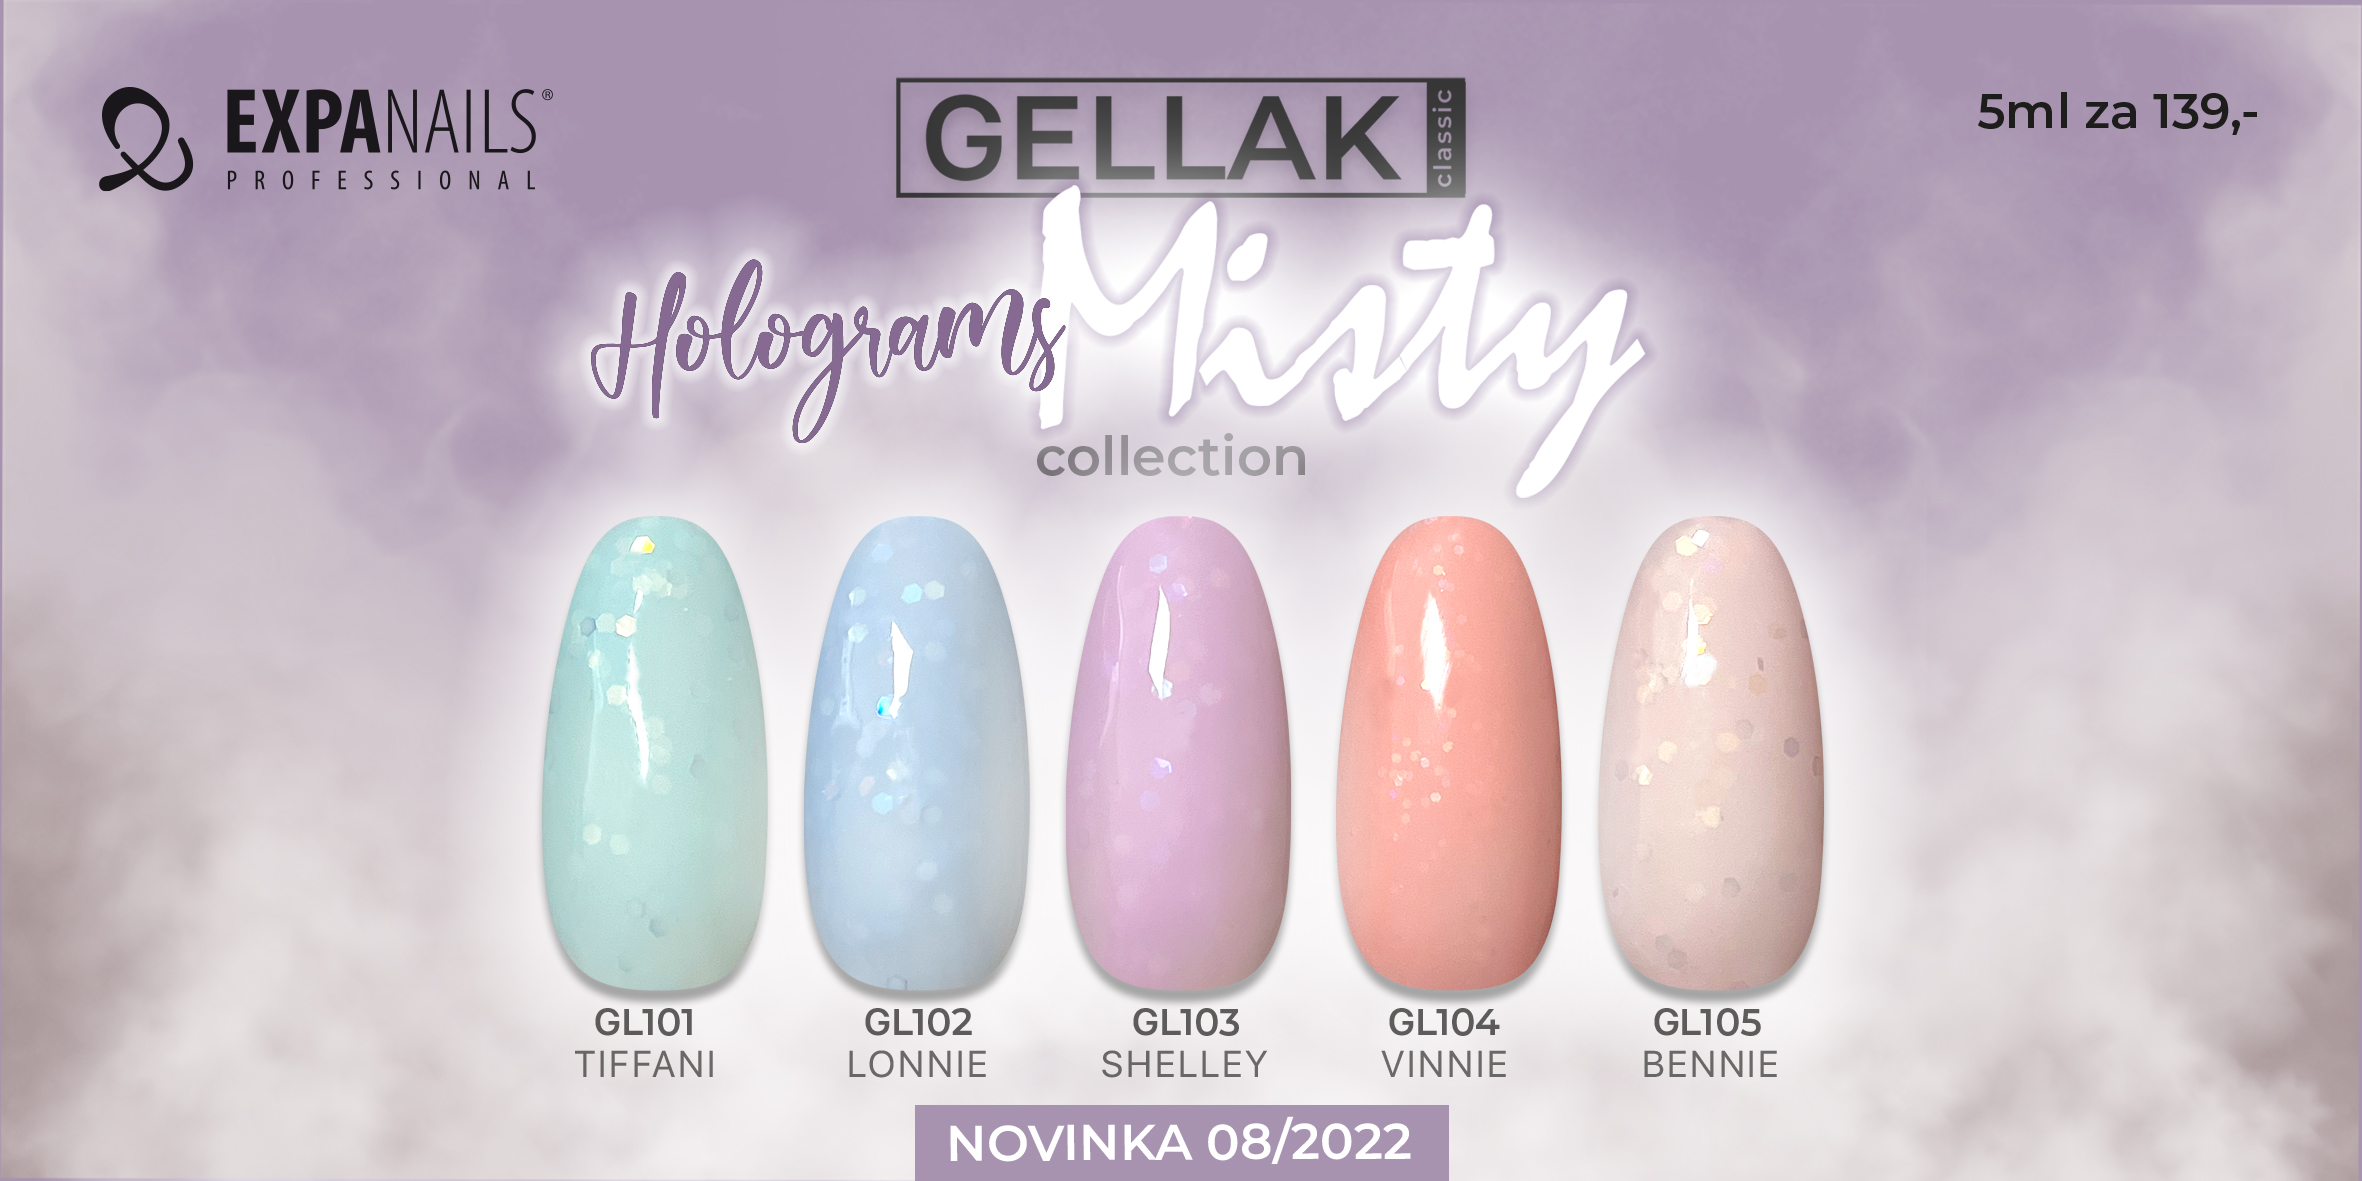 Gel laky Holograms & Flakes, Misty Collection